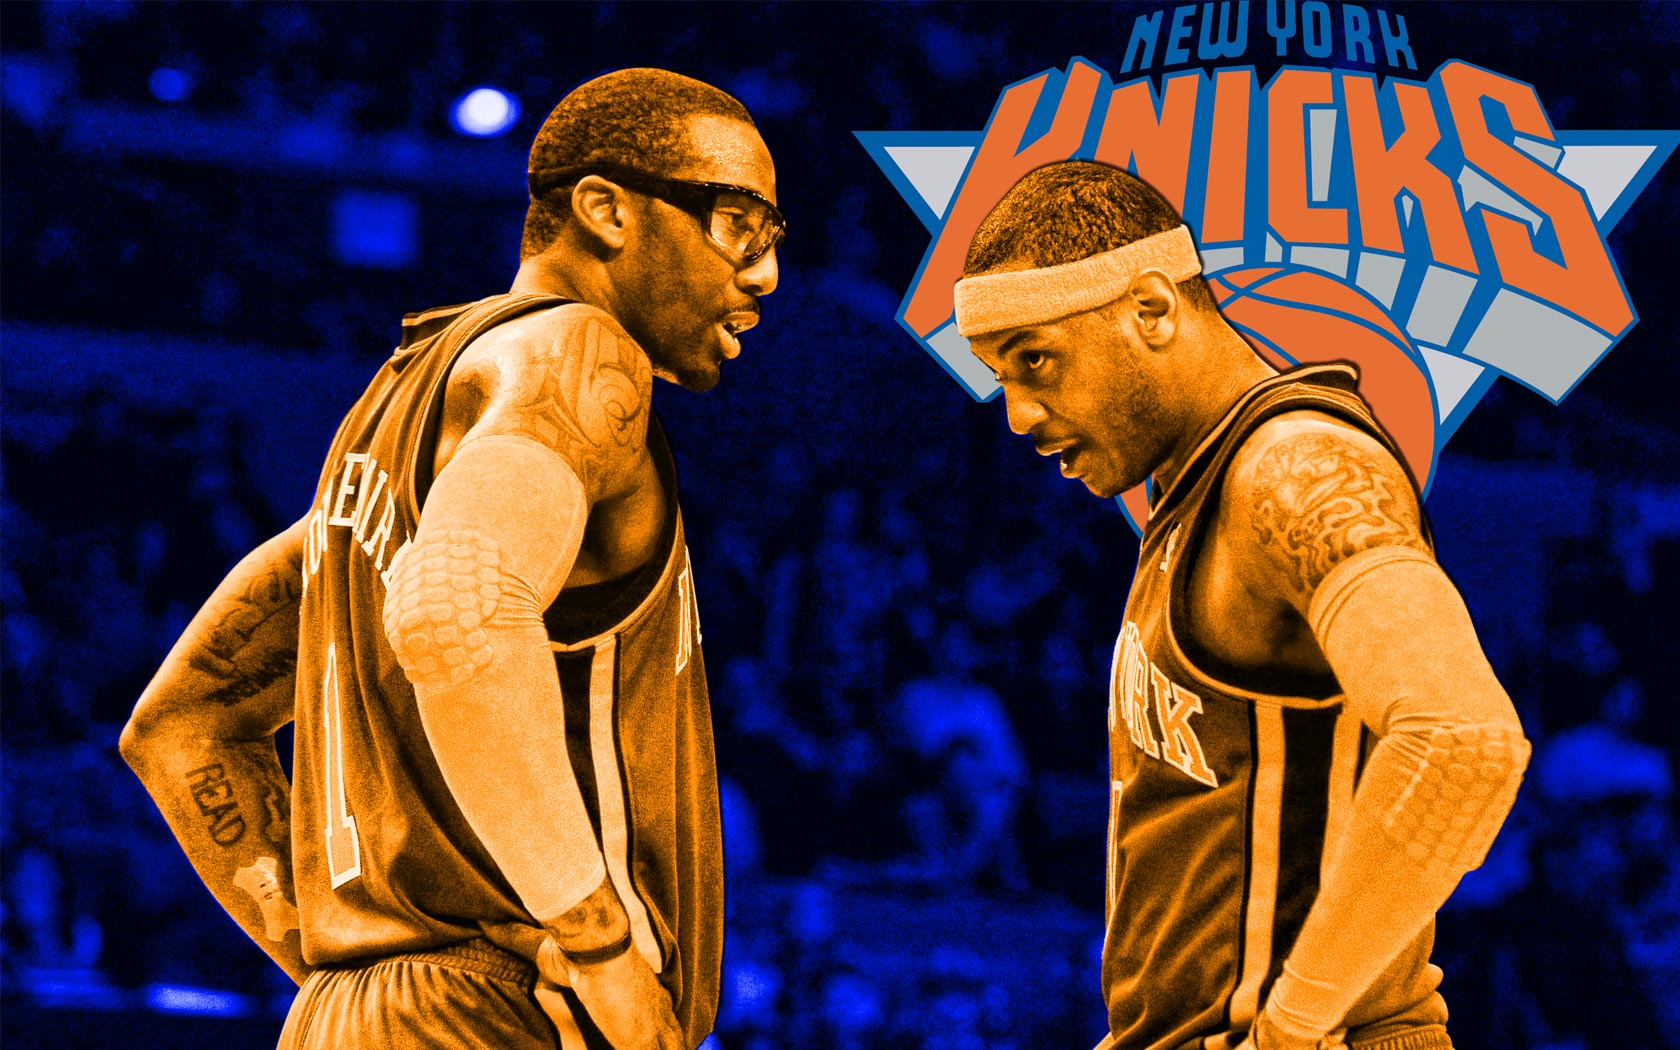 Wallpaper Together With Amare Stoudemire You Guys In Ny